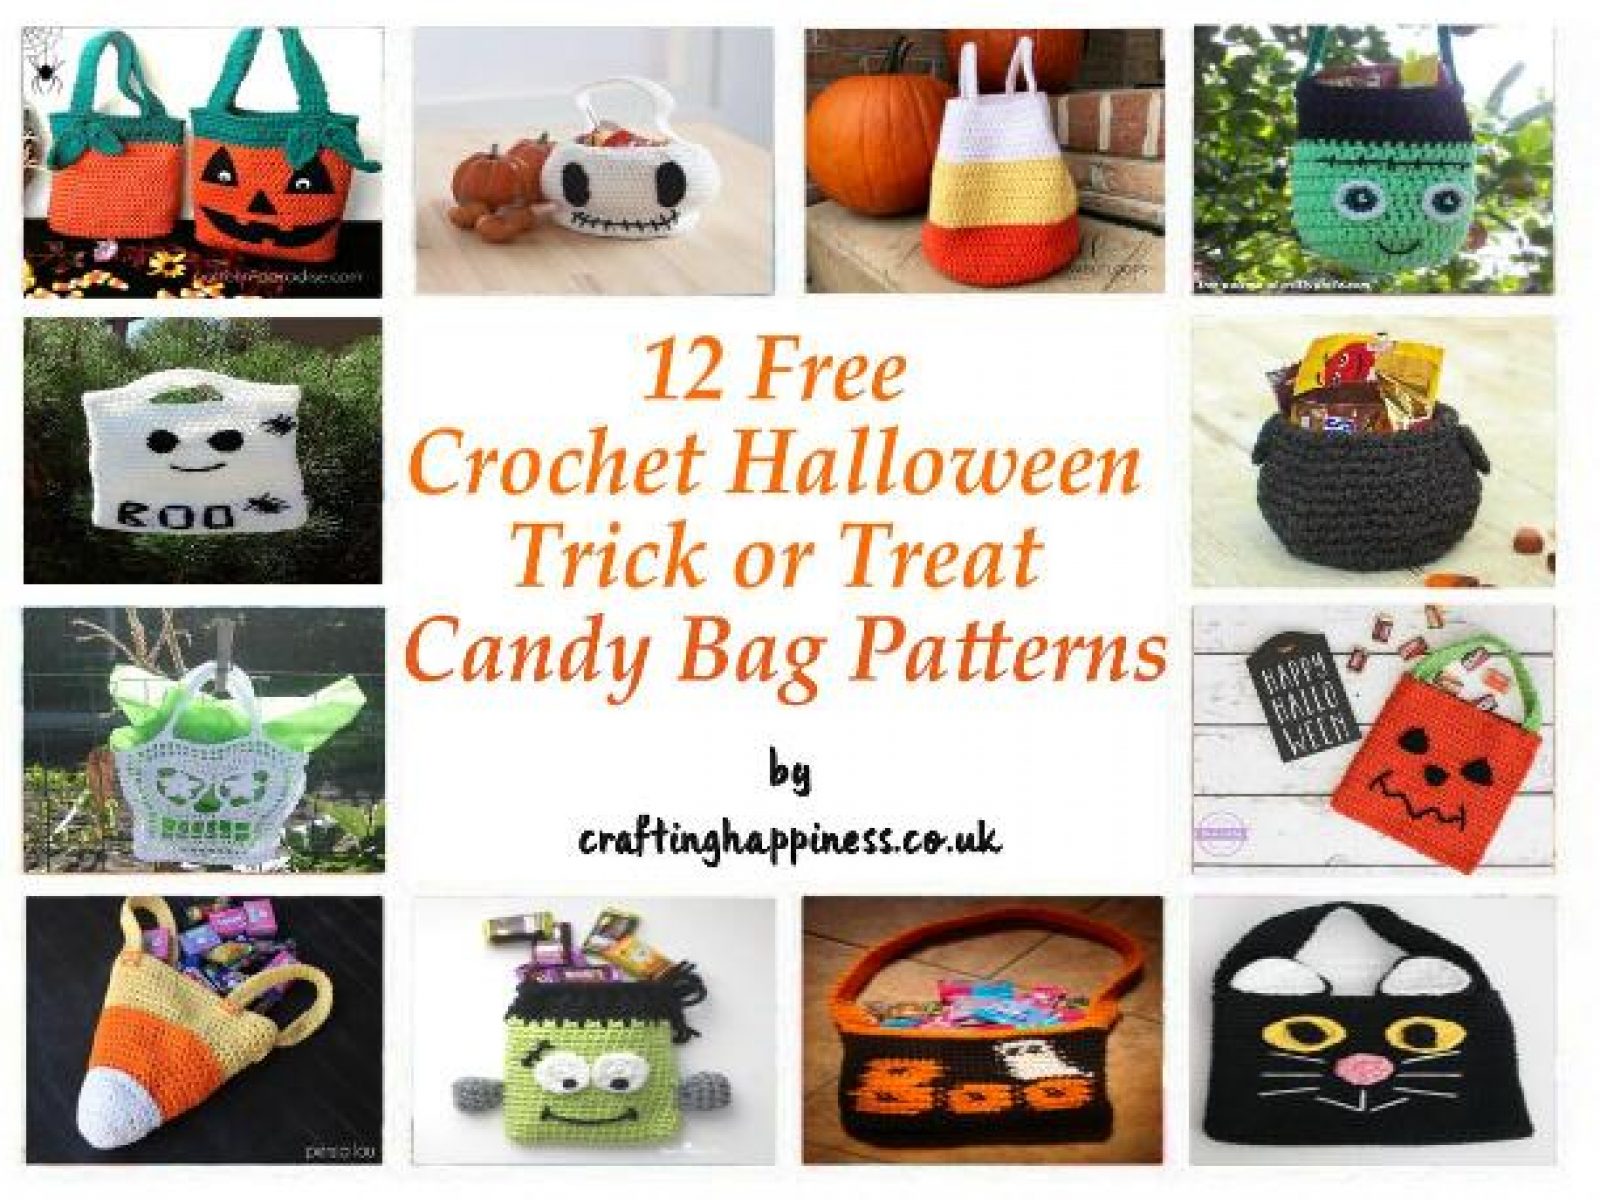 12 Free Crochet Halloween Trick or Treat Candy Bag Patterns